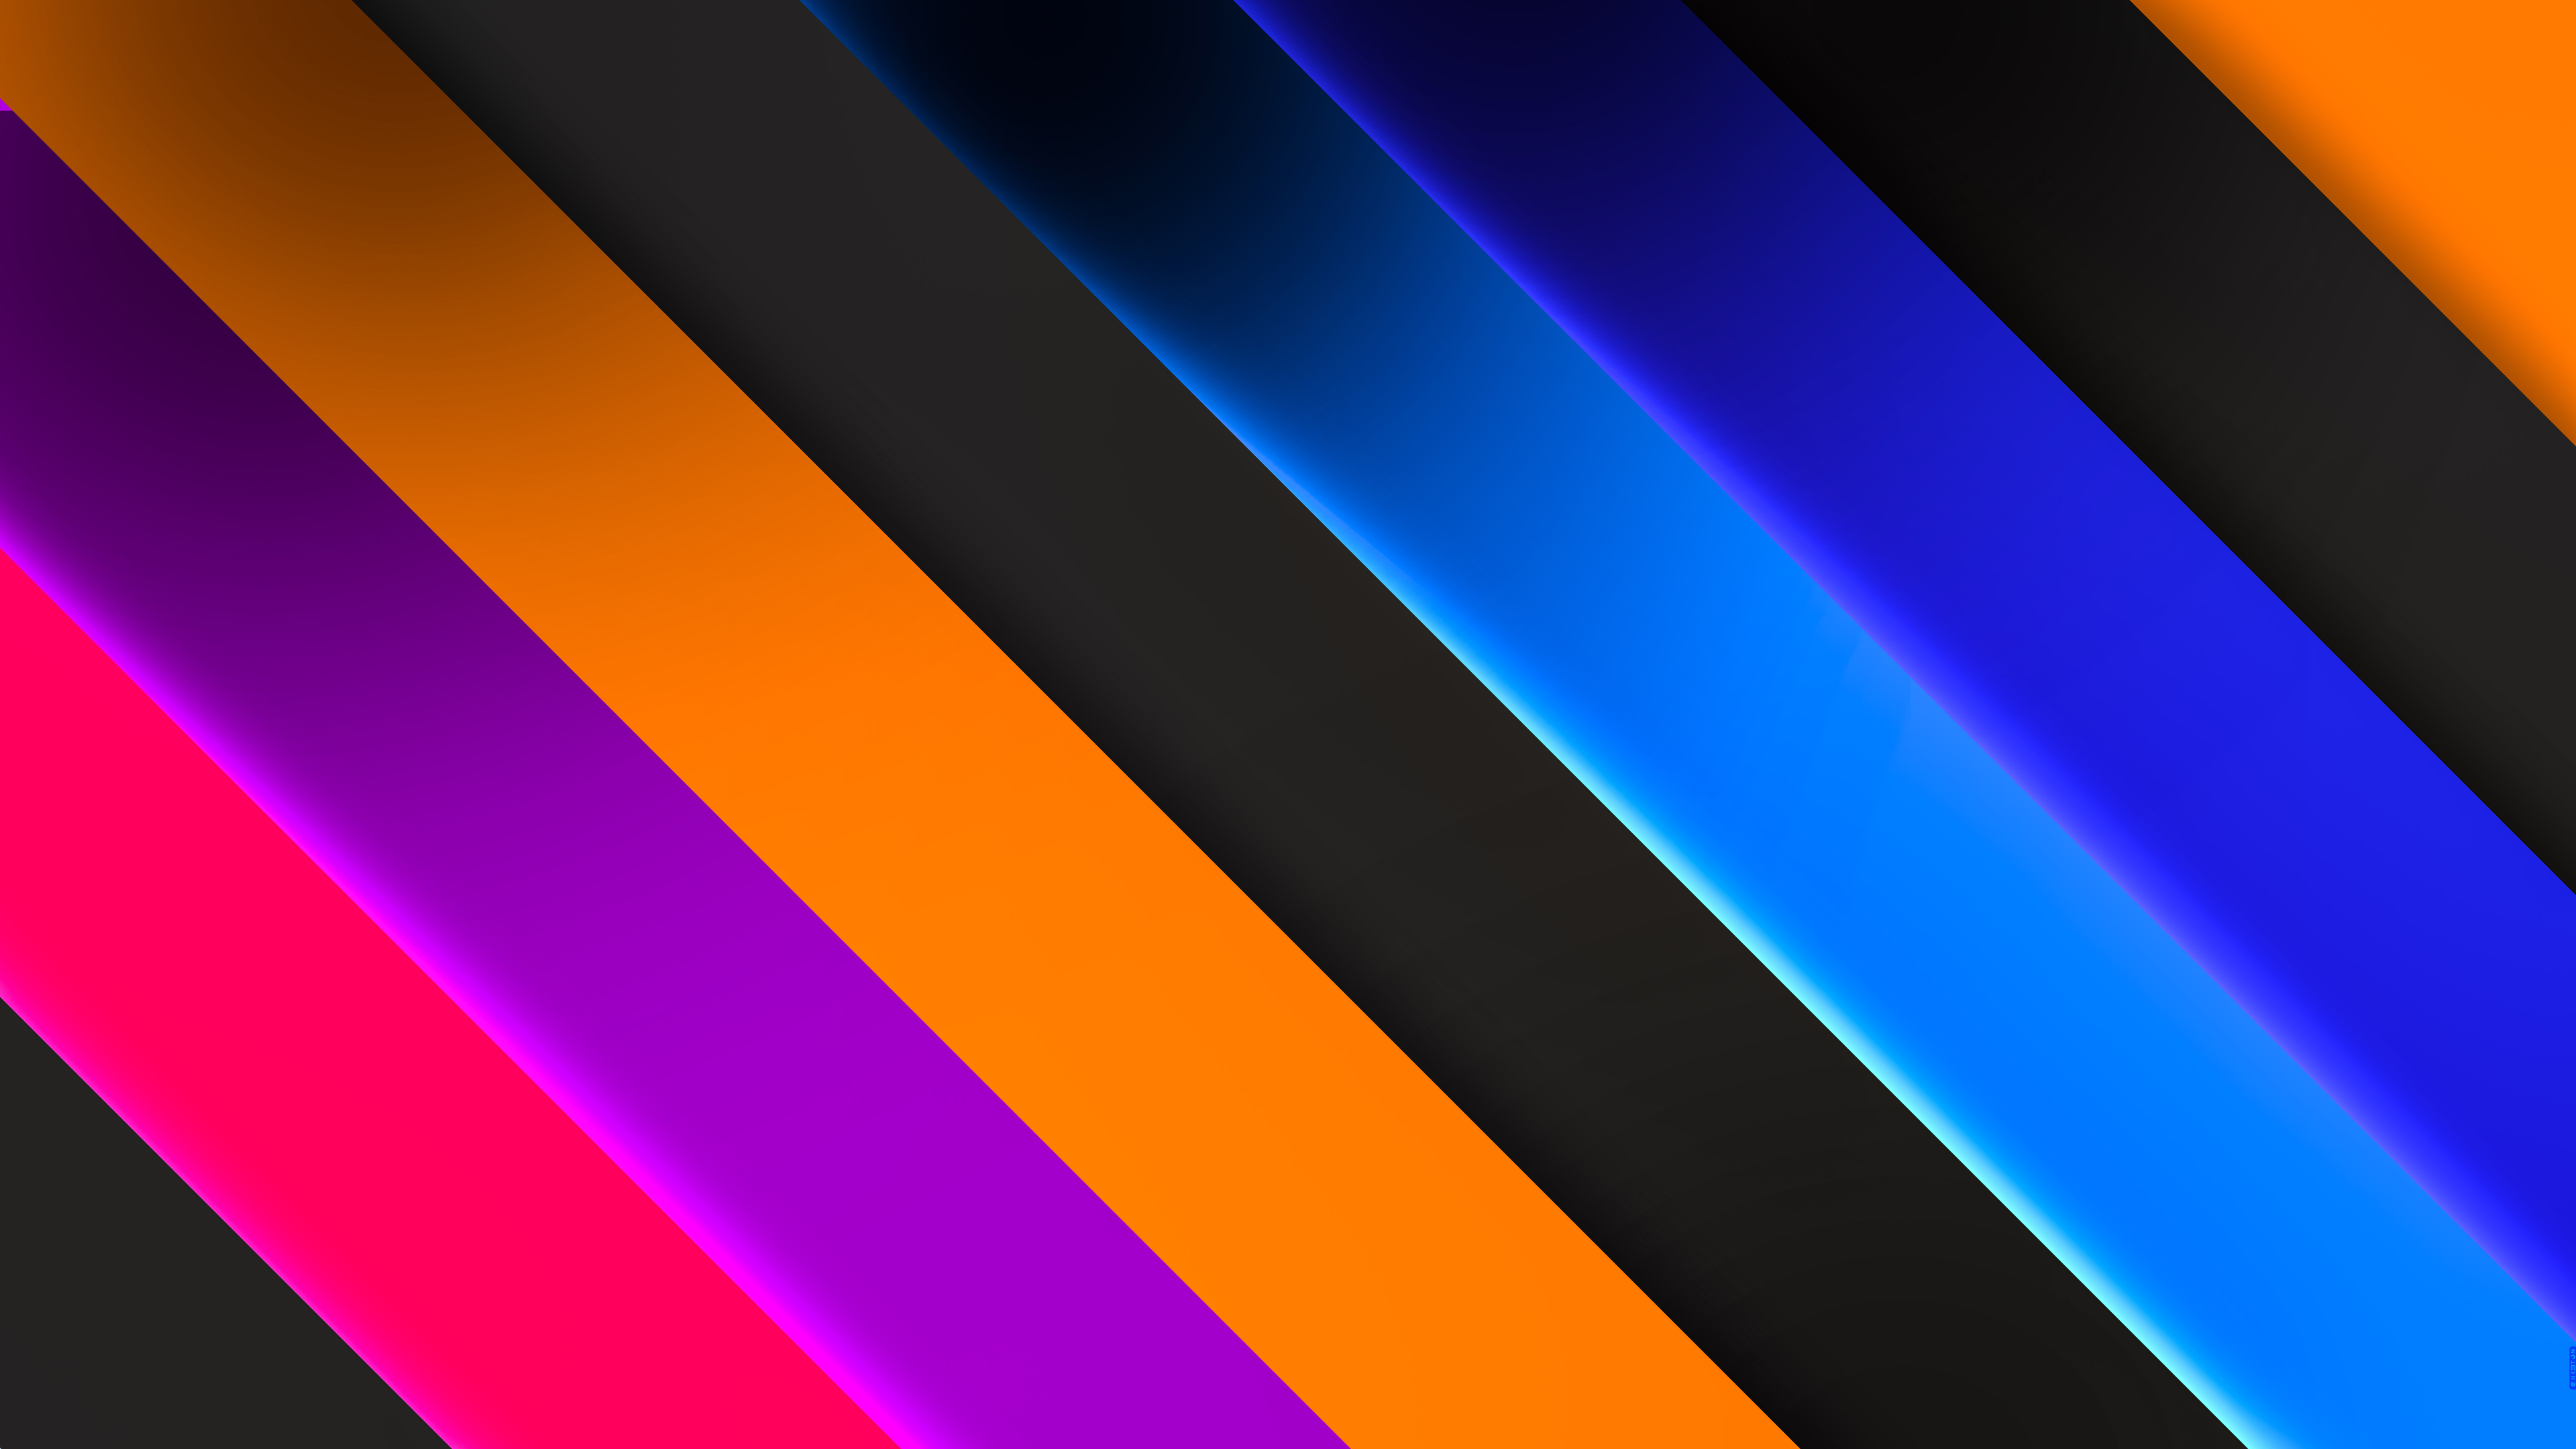 abstract-lines-shapes-8k-qk.jpg